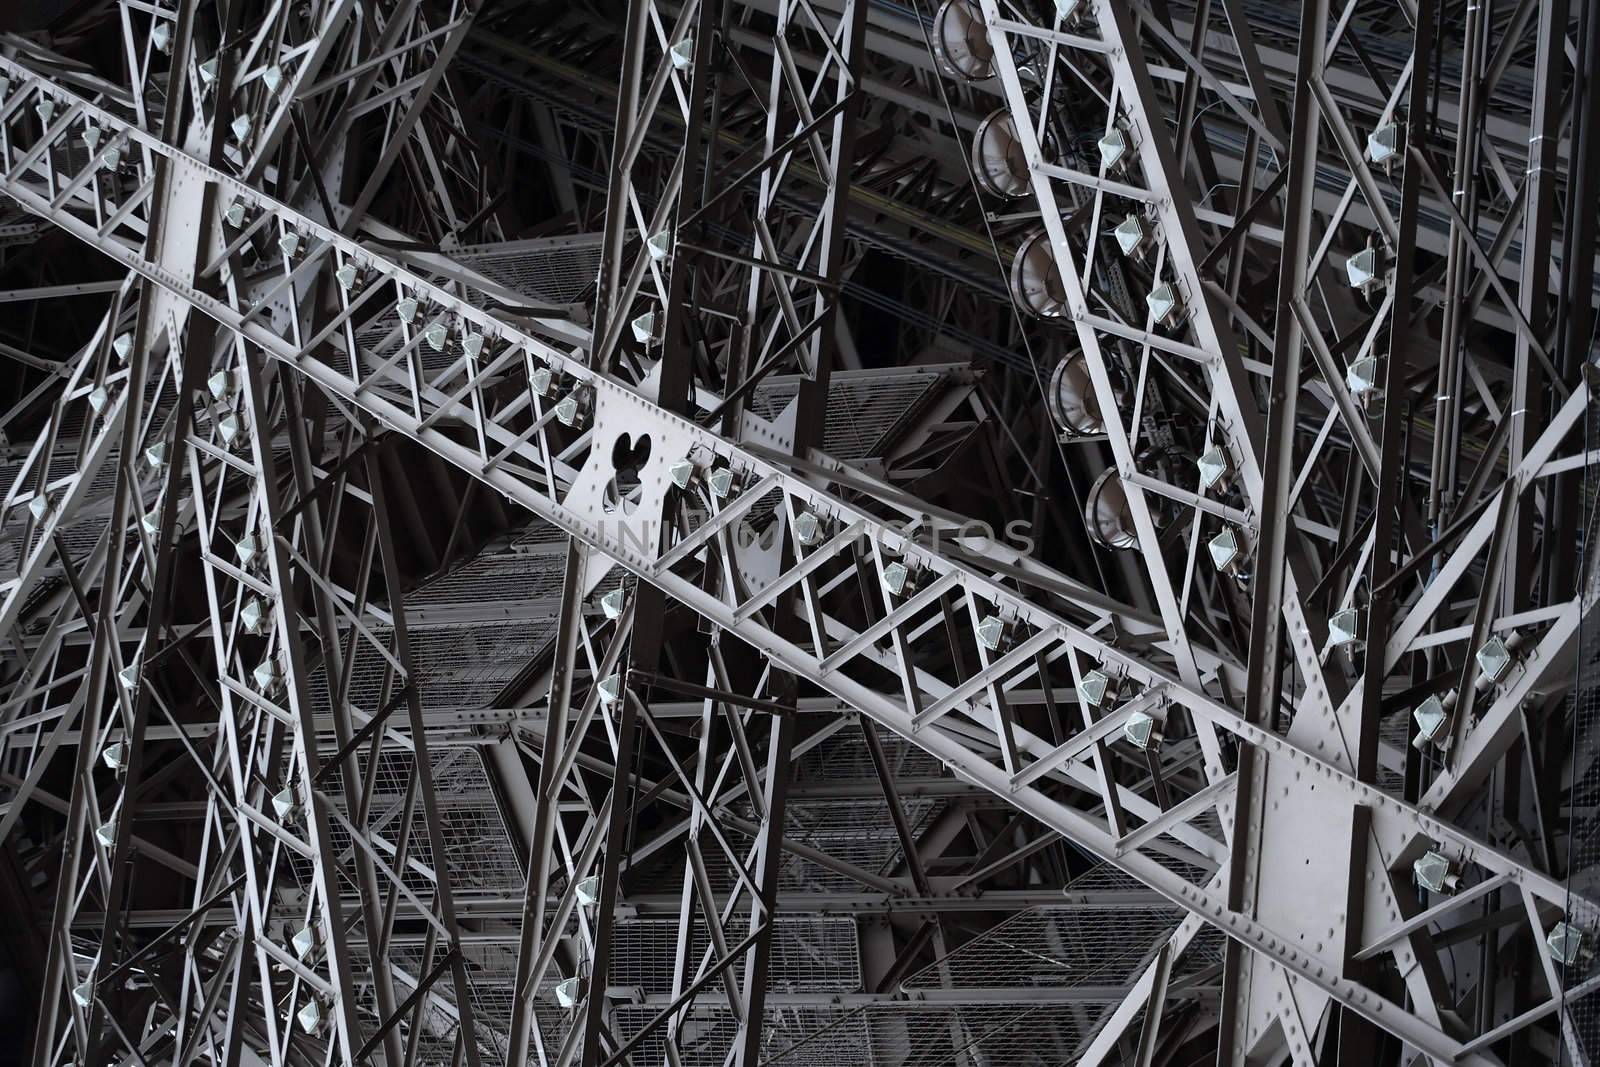 Abstract image of the criss-crossing support structure of the Eiffel Tower.